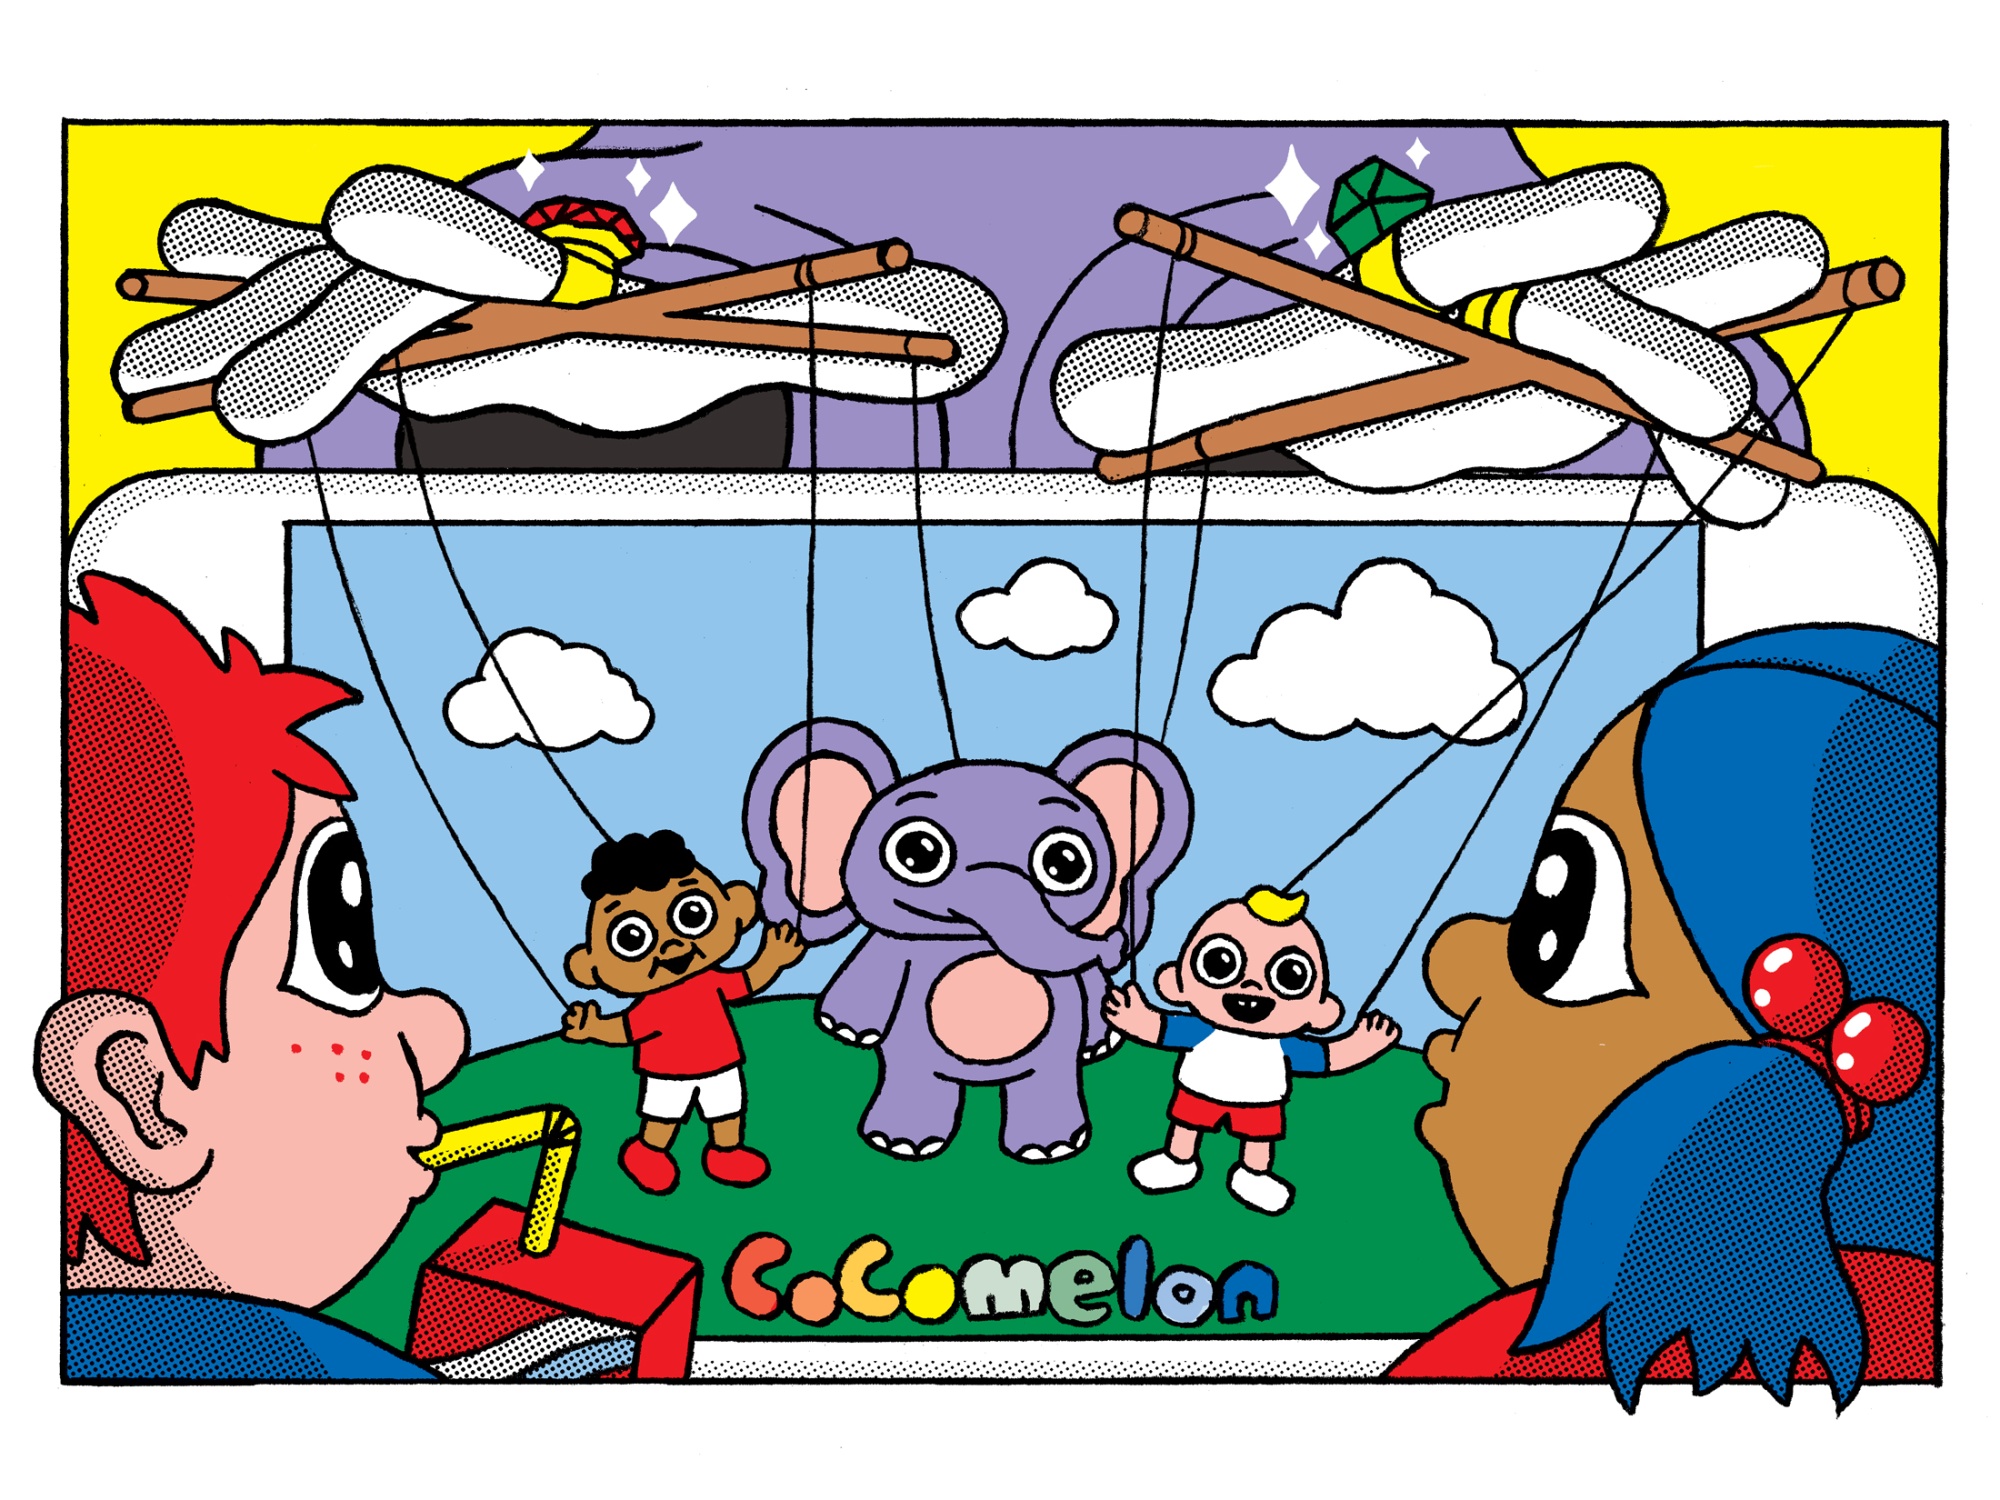 About: Cocomelon Coloring Book (Google Play version)